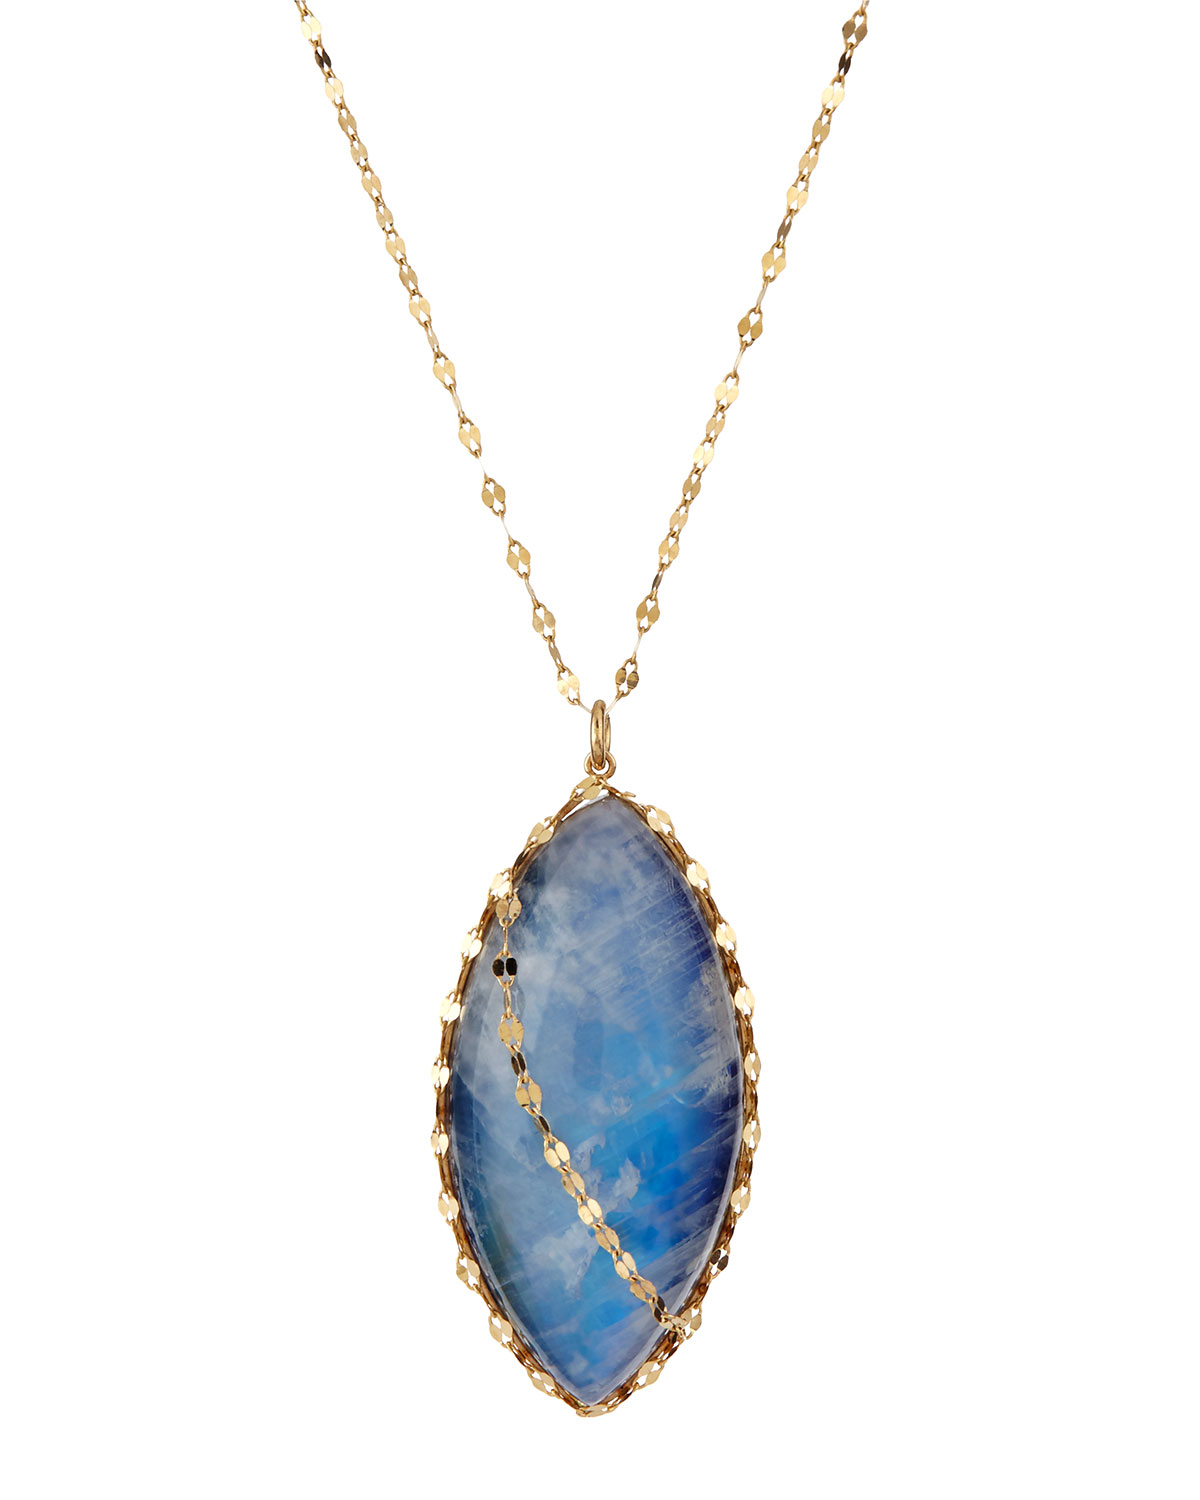 Lyst - Lana Jewelry Large Mesmerize Pendant Necklace in Blue